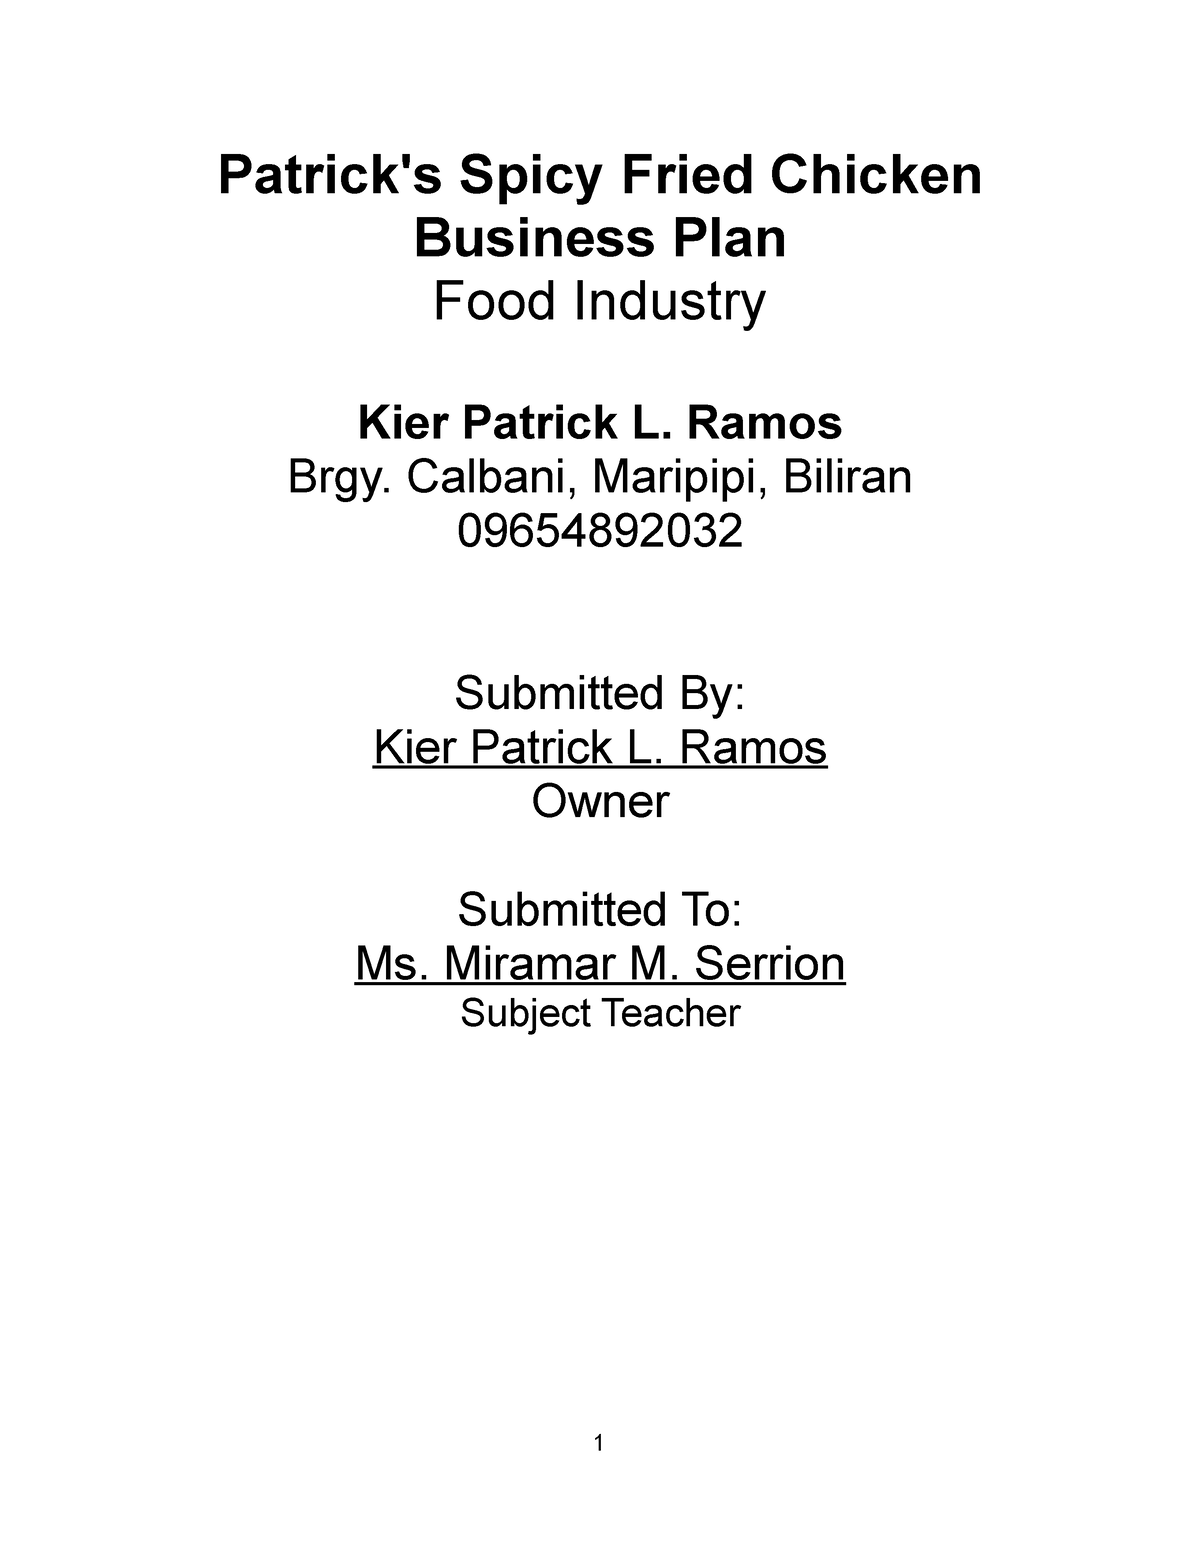 fried chicken business plan example